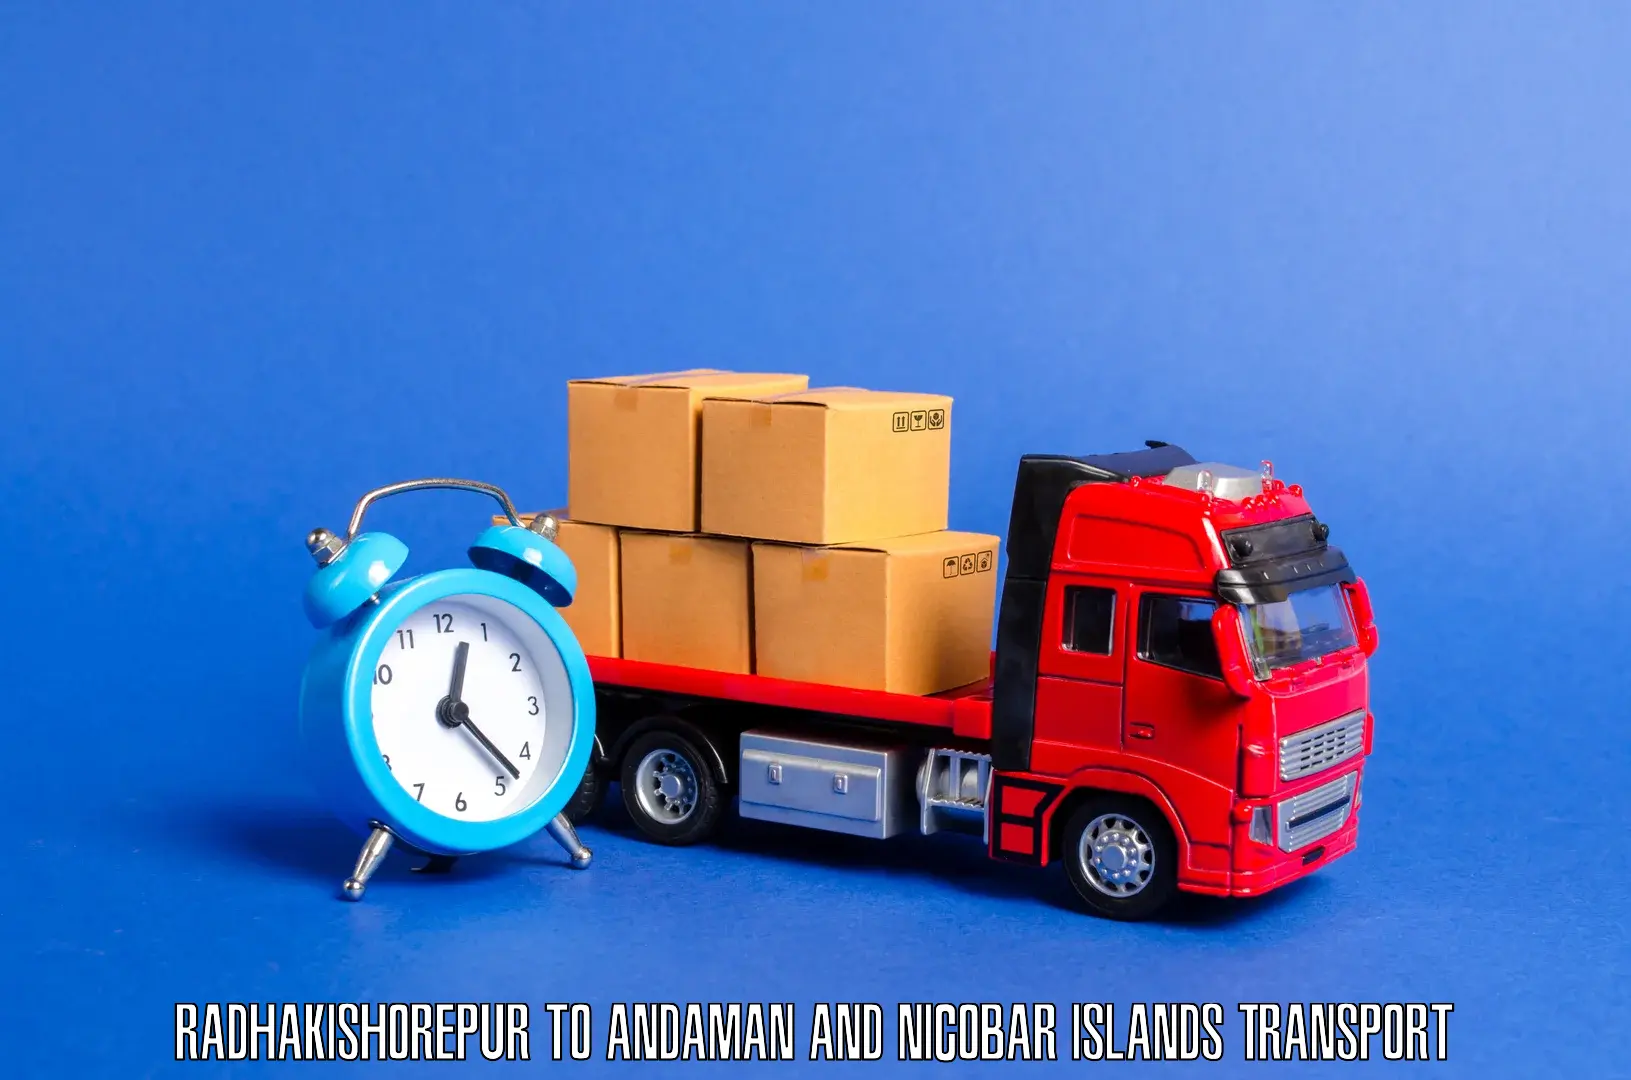 Furniture transport service in Radhakishorepur to North And Middle Andaman